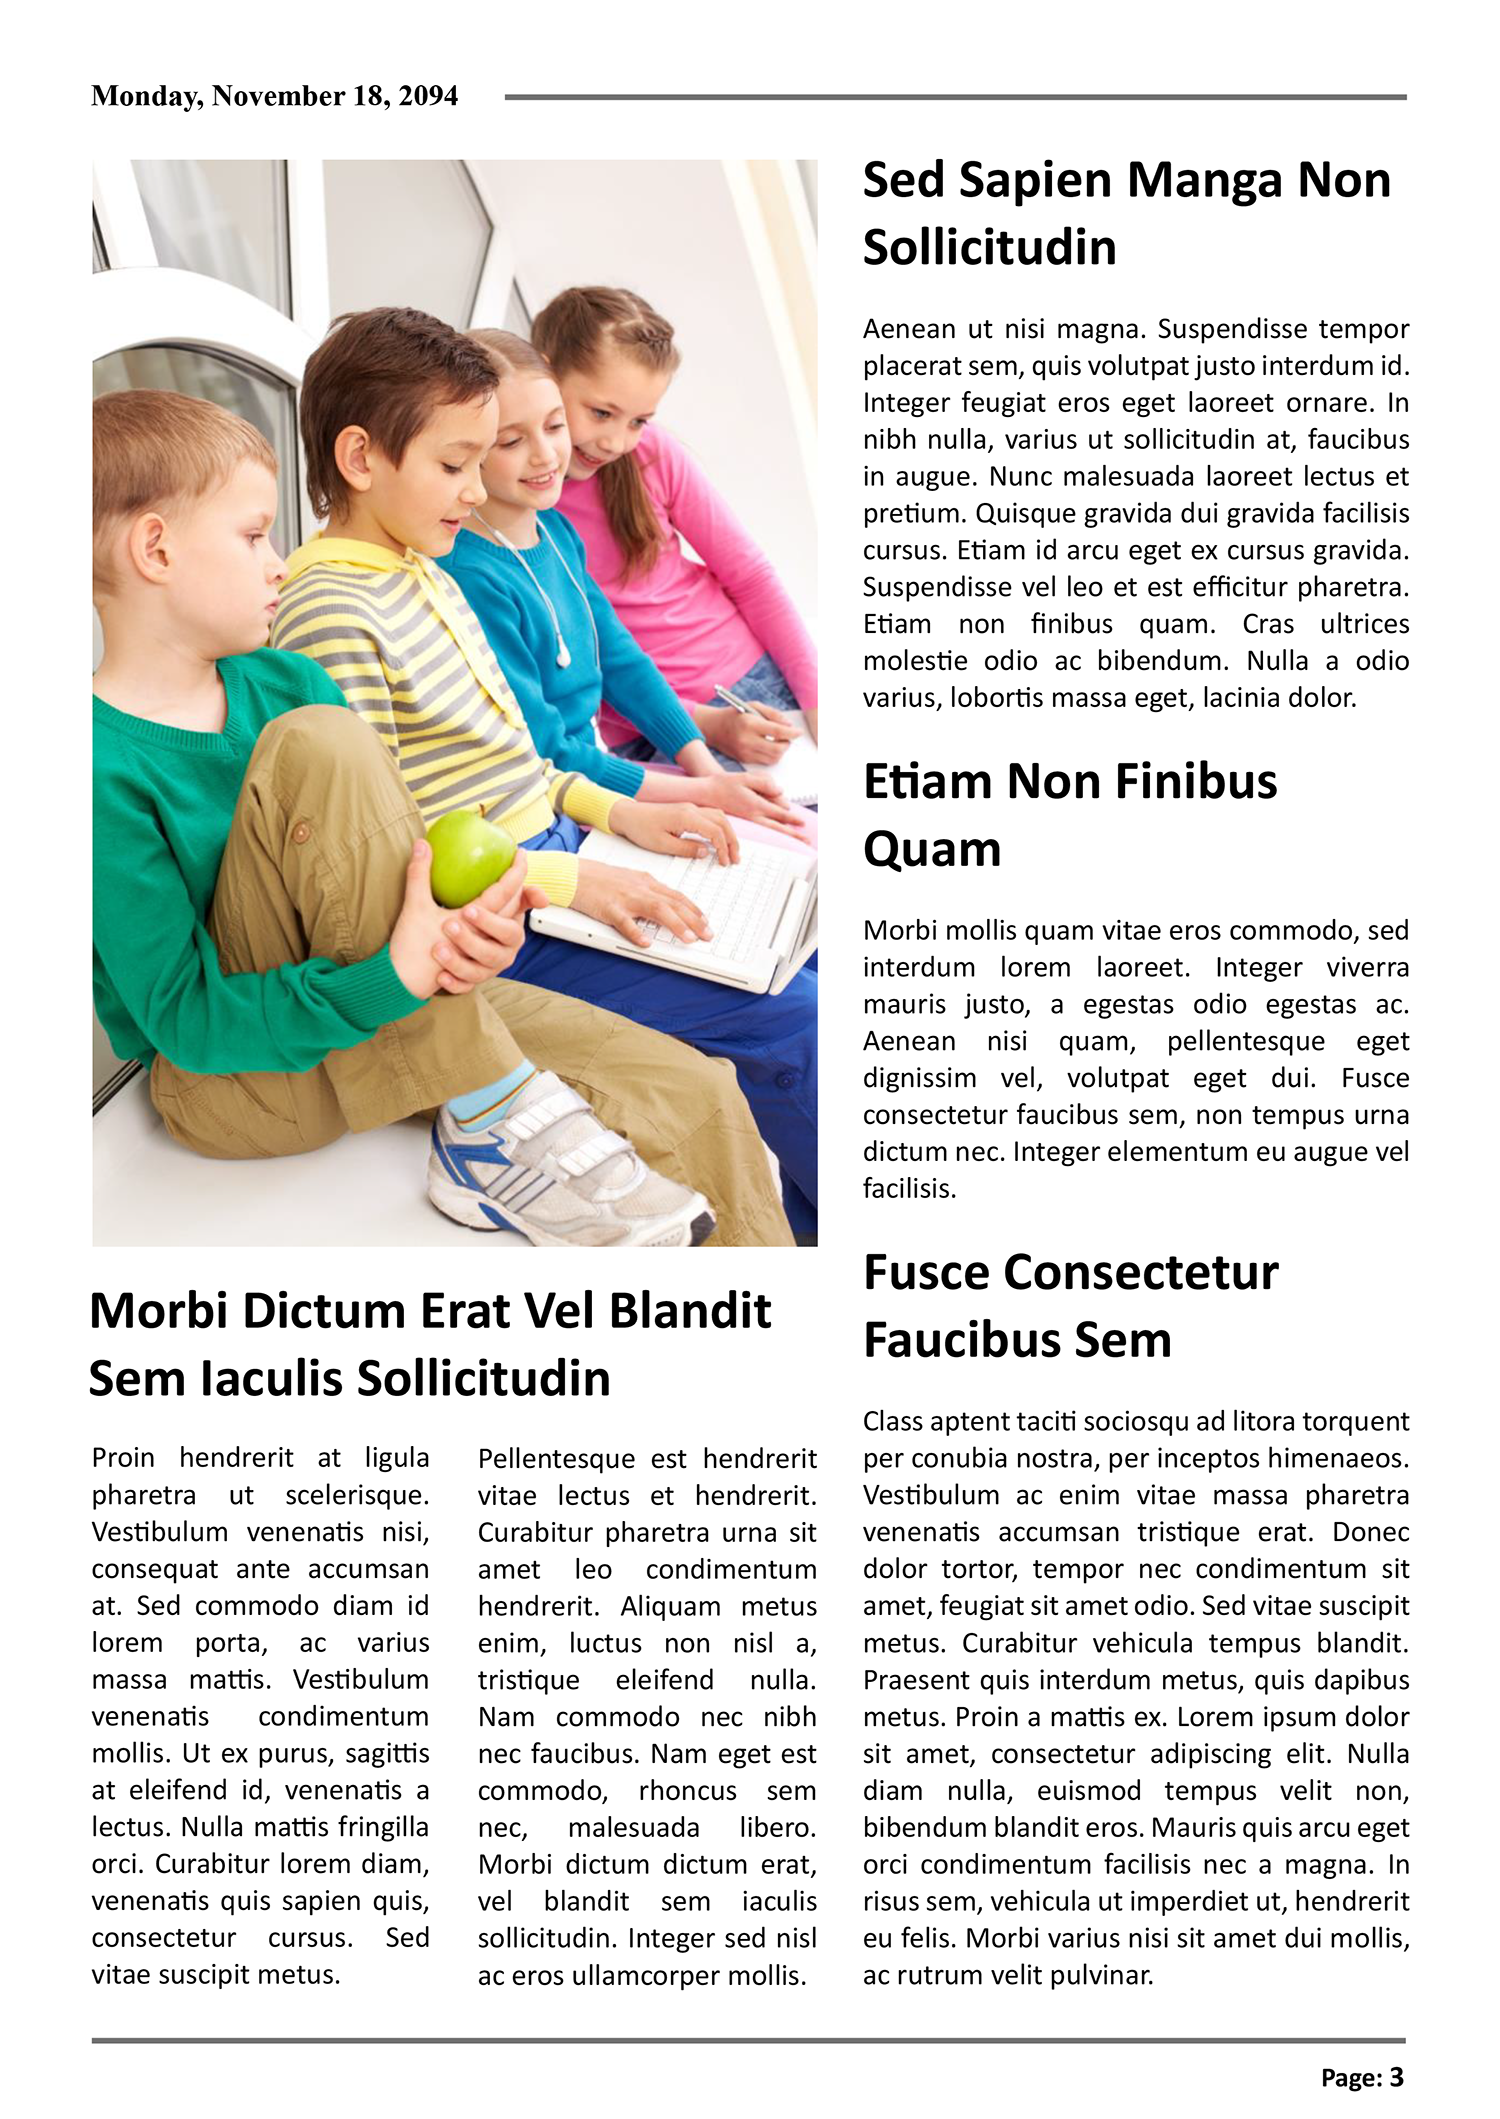 Modern Clean Classroom Newspaper Article Template - Page 03